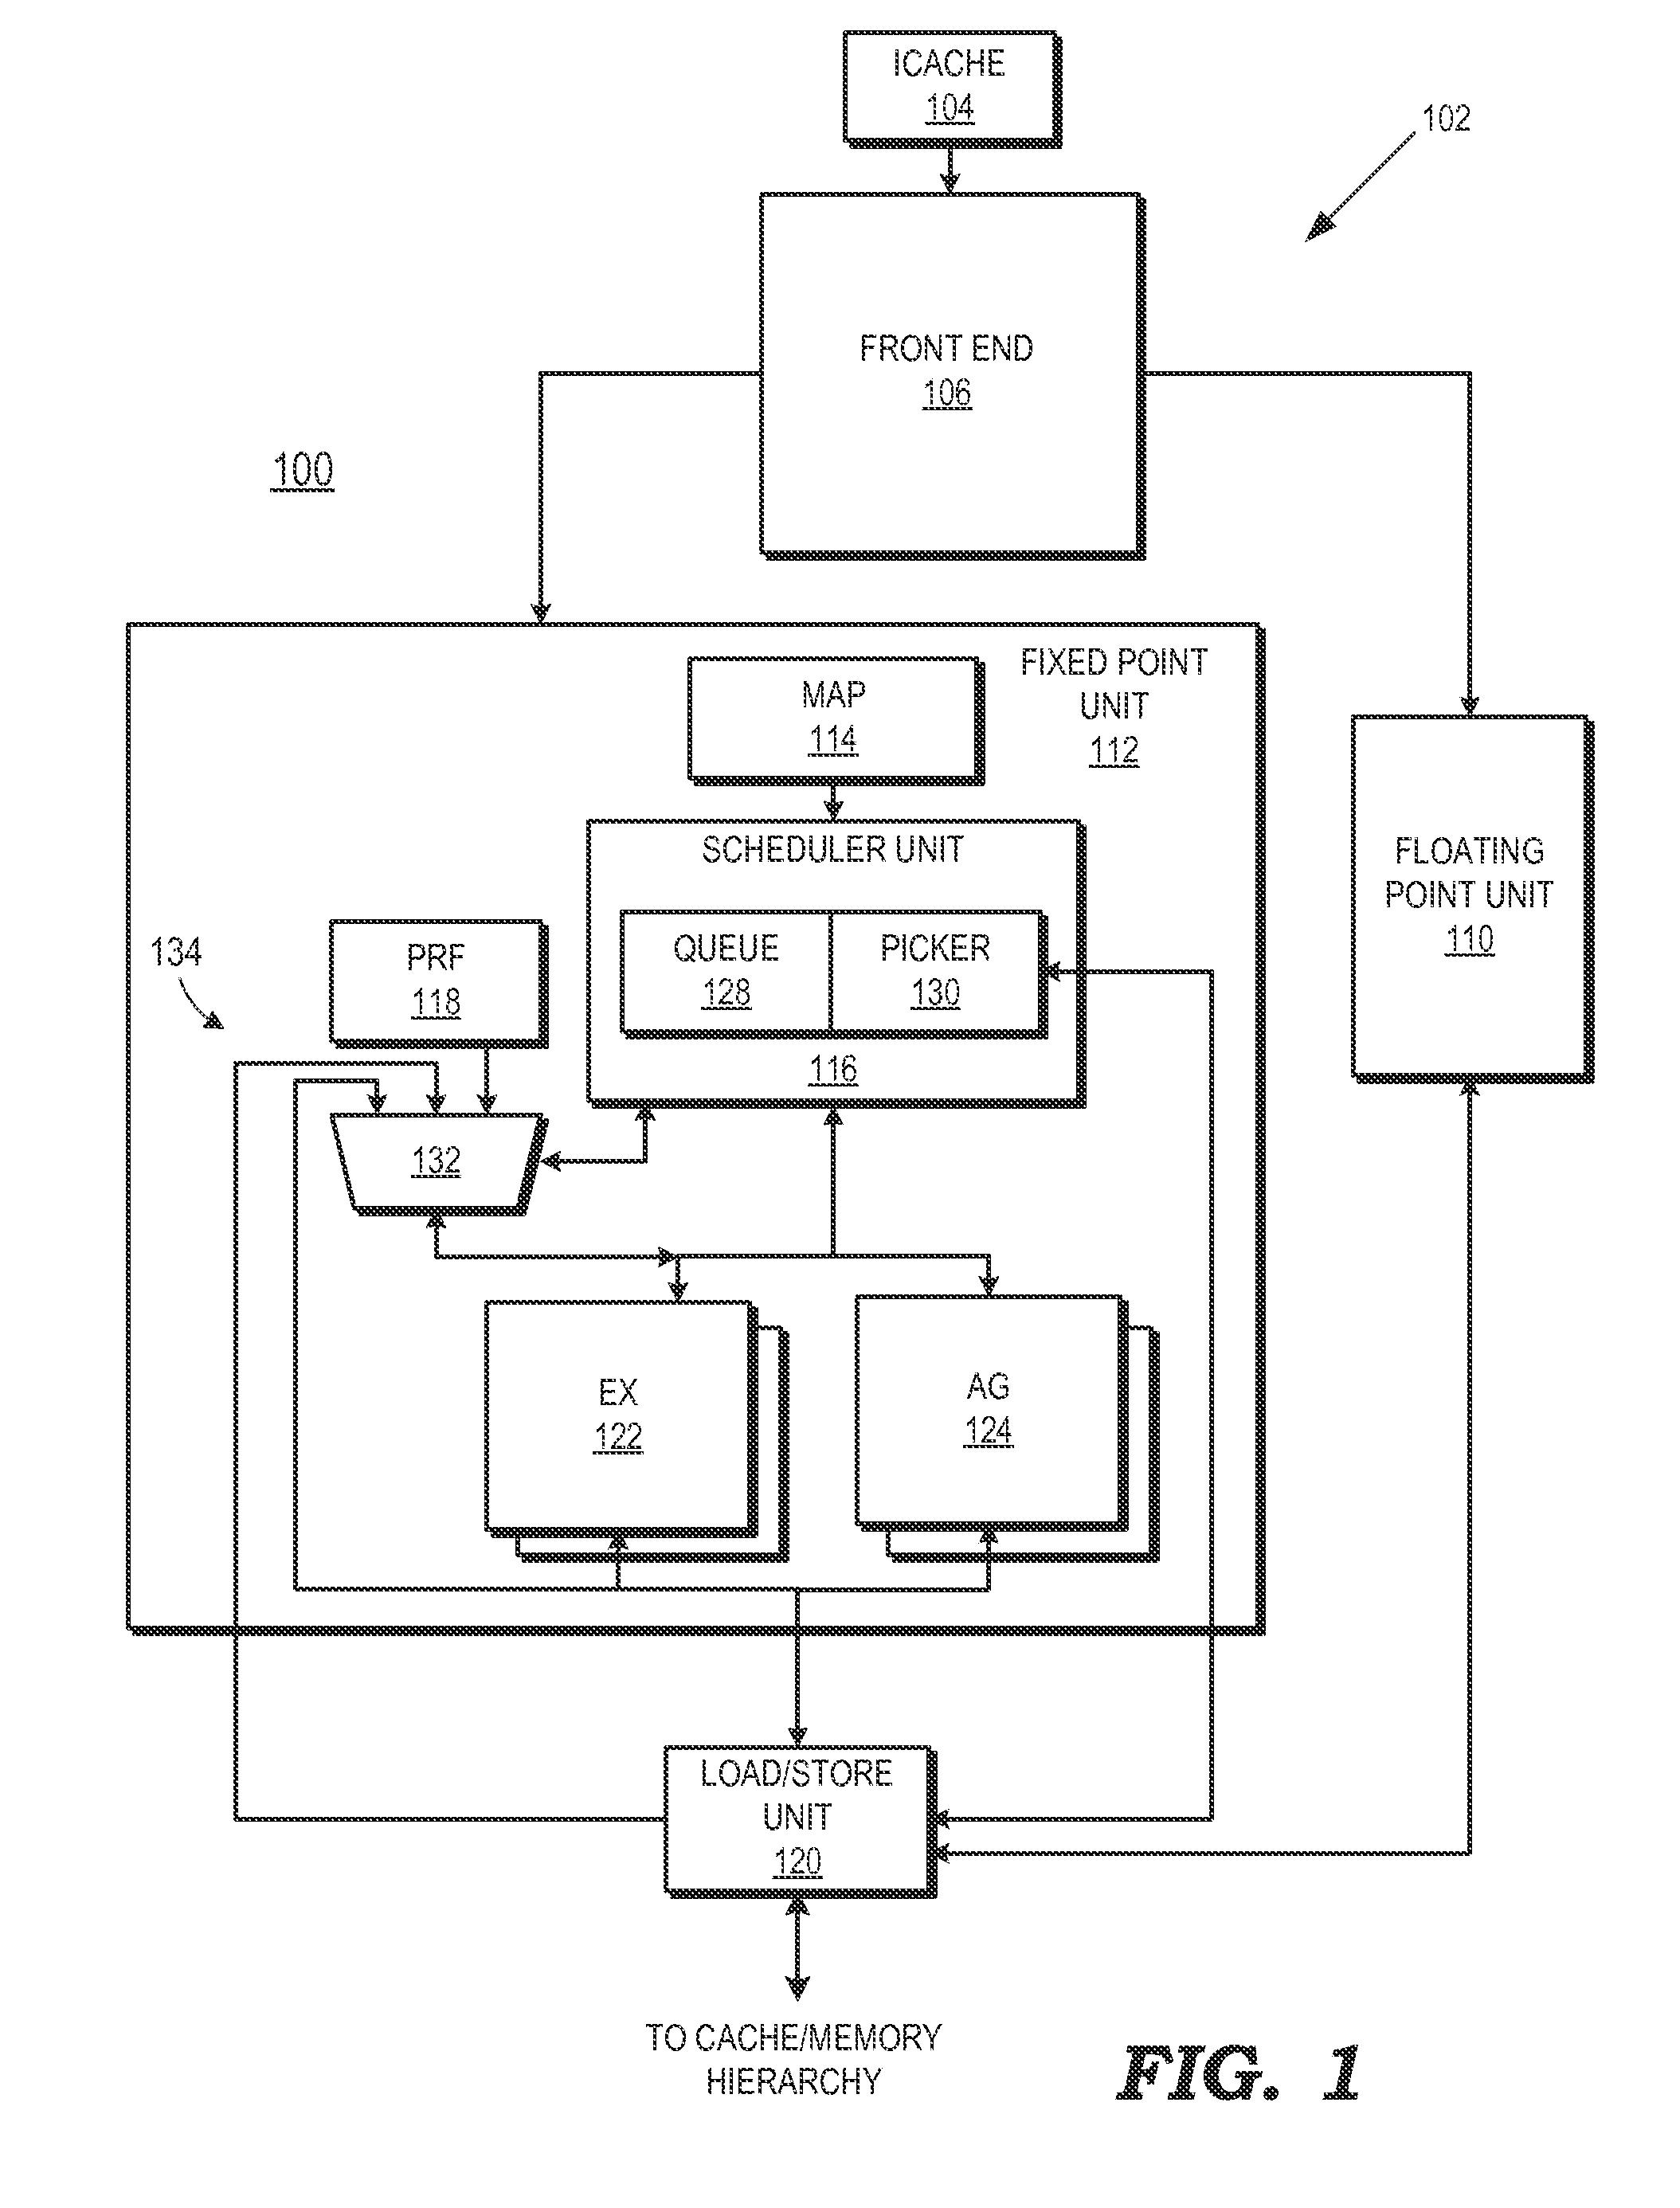 Dependent instruction suppression in a load-operation instruction